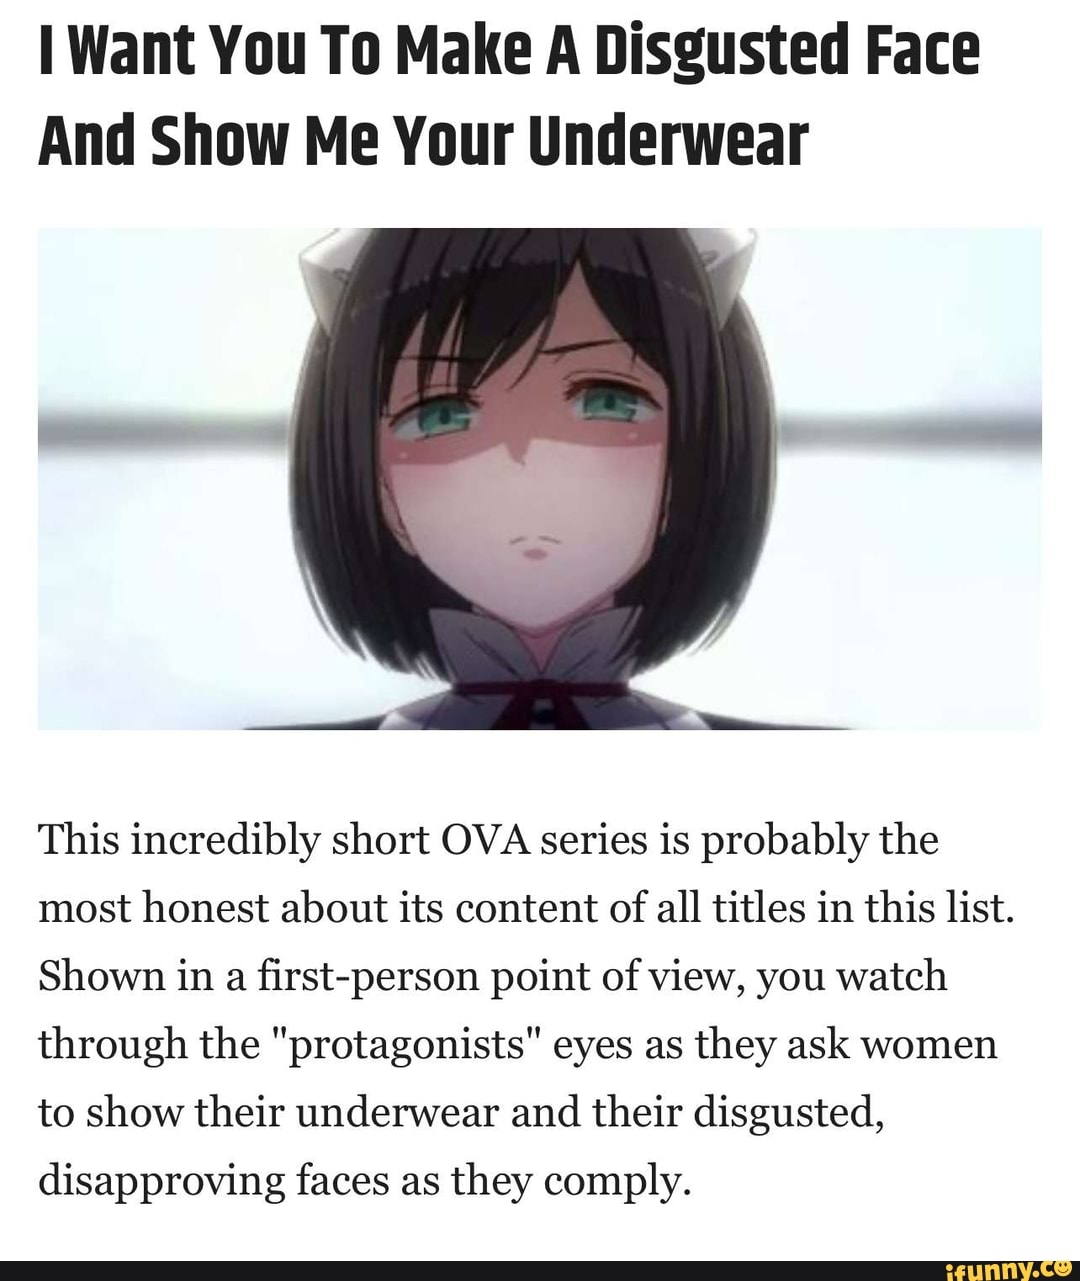 I Want You To Make a Disgusted Face and Show Me Your Underwear